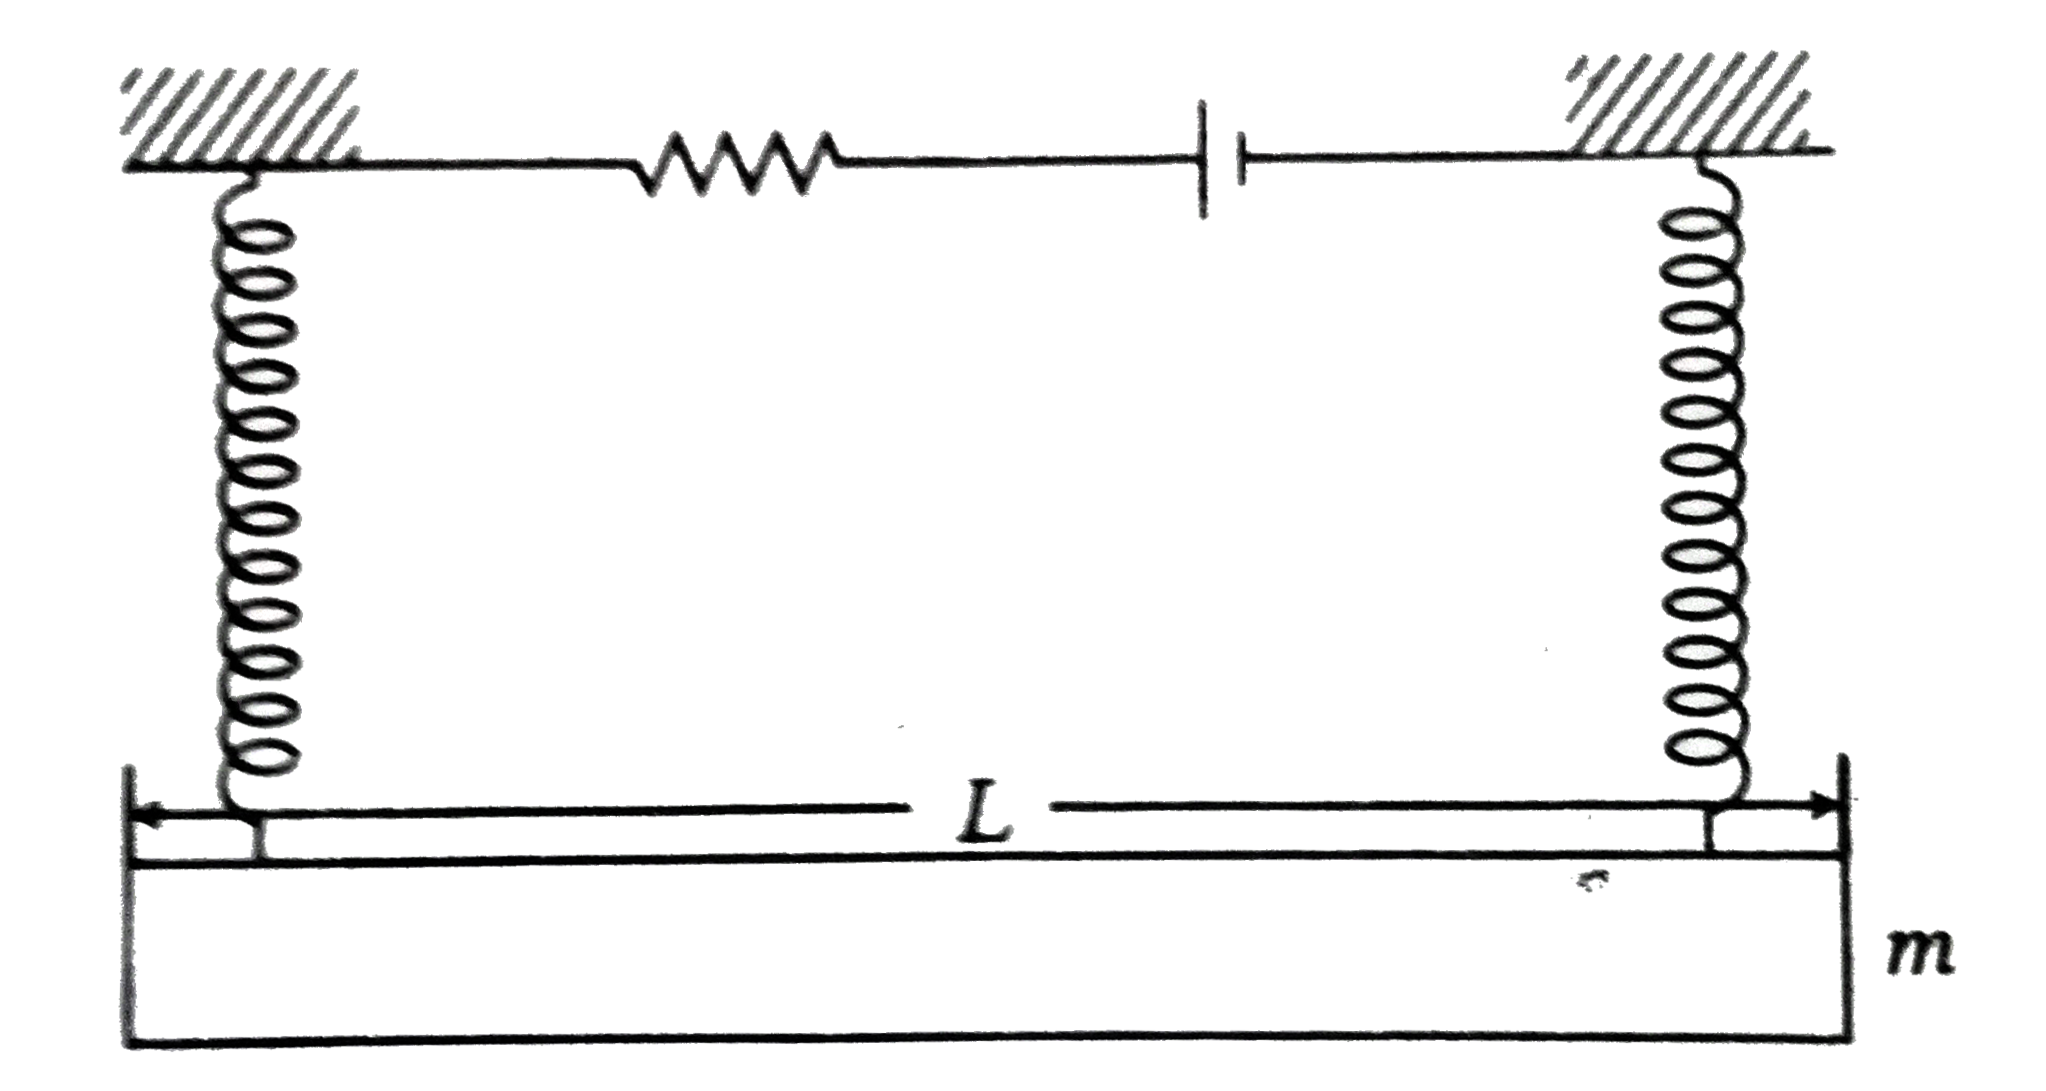 A straight rod of mass m and length L is suspended from the identical springs as shown in figure. The spring is stretched a distance x(0) due to the weight ot the wire.       The circuit has total resistance R. When the magnetic field parpendicular to the plane of paper is switched on, then springs are observed to extend further by the same distance. The magnetic field strenght is